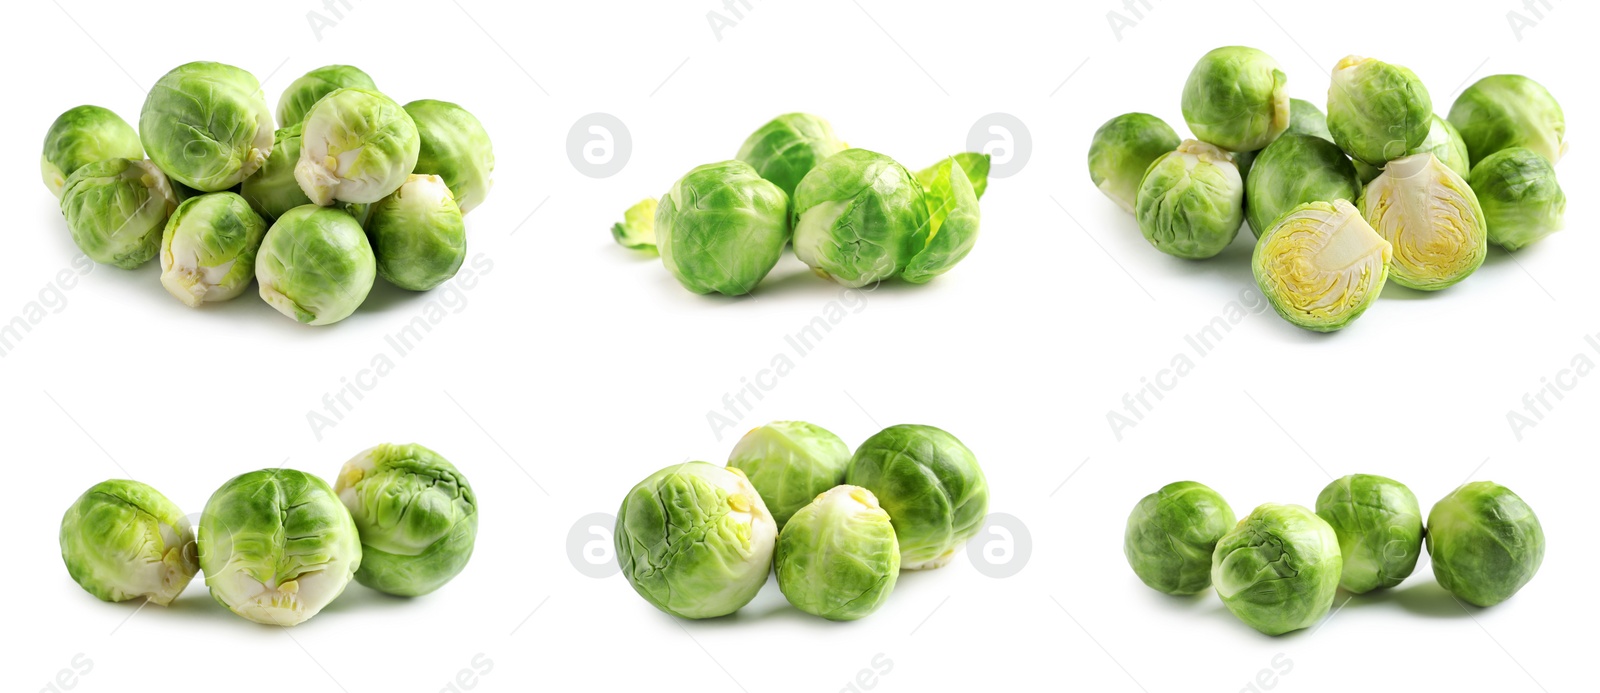 Image of Set of fresh Brussels sprouts on white background. Banner design